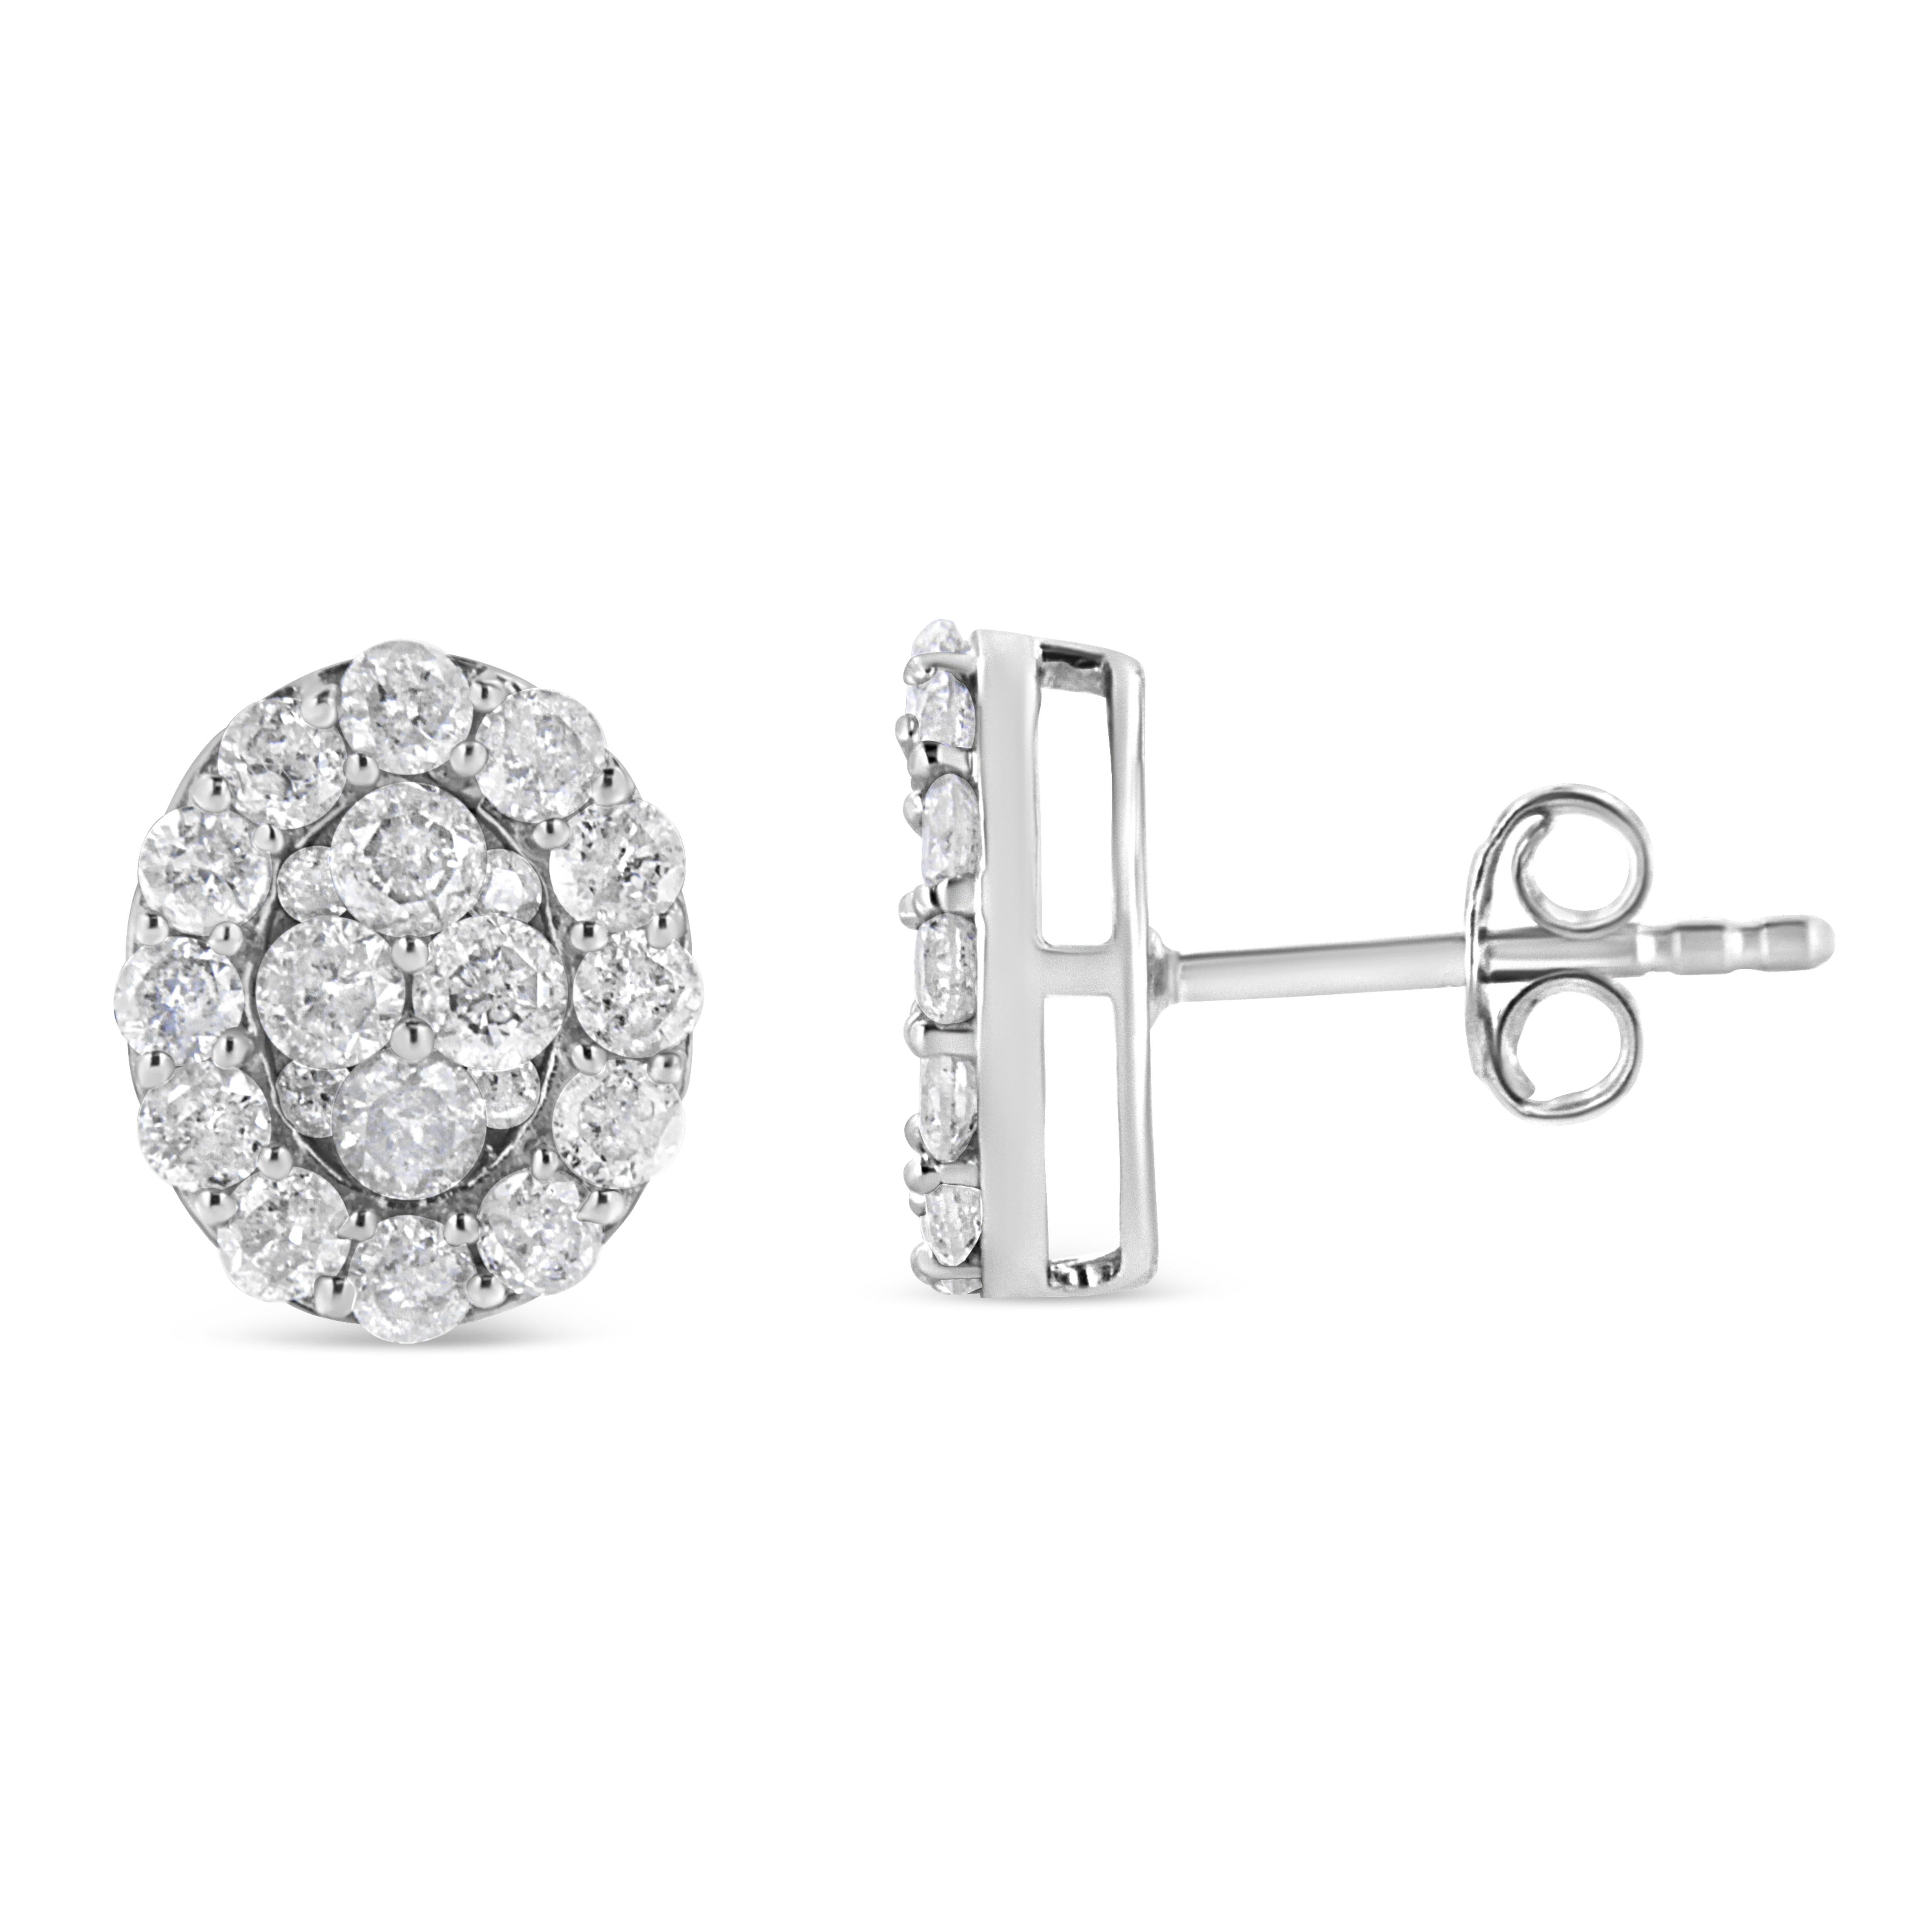 These glamorous earrings are set with a dazzling total diamond weight of 1 1/2 cttw. Designed in an ovular manner, these earrings are set with 40 round-cut diamonds in an elegant prong setting. The overlapping of the diamonds gives these earrings a